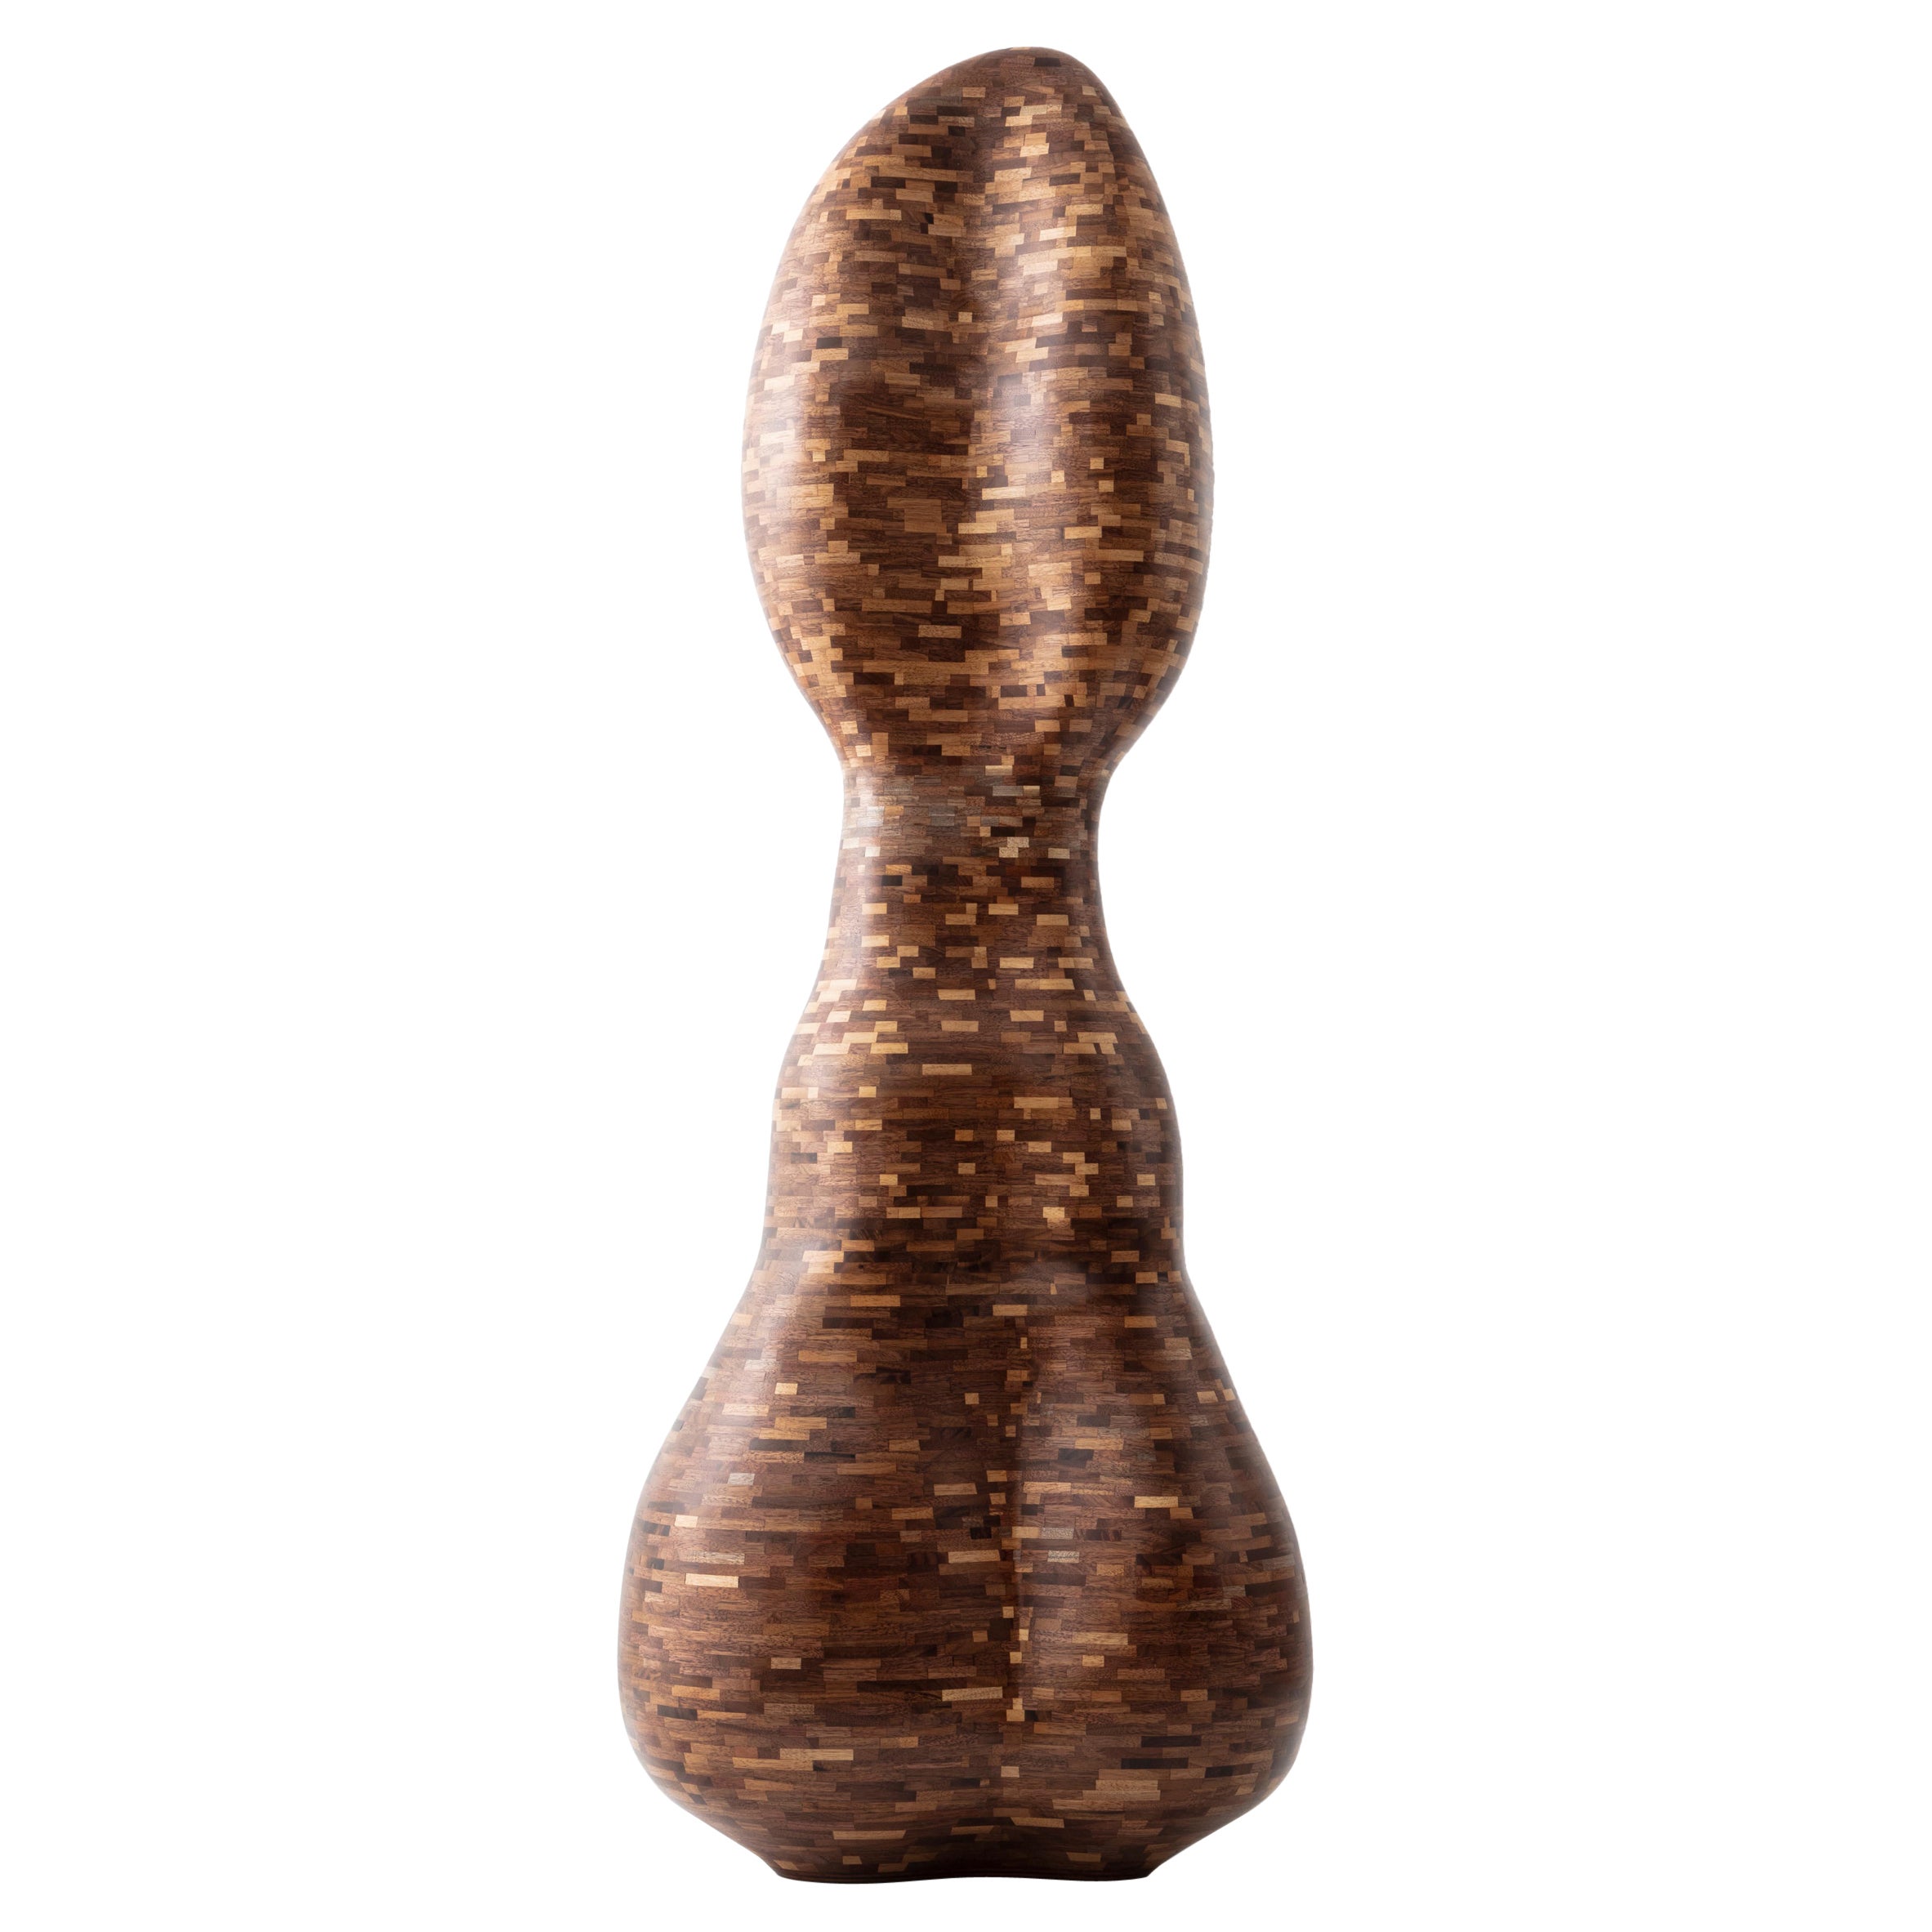 STACKED Sculpture No 5. Made of Salvaged Walnut by Richard Haining Available Now For Sale